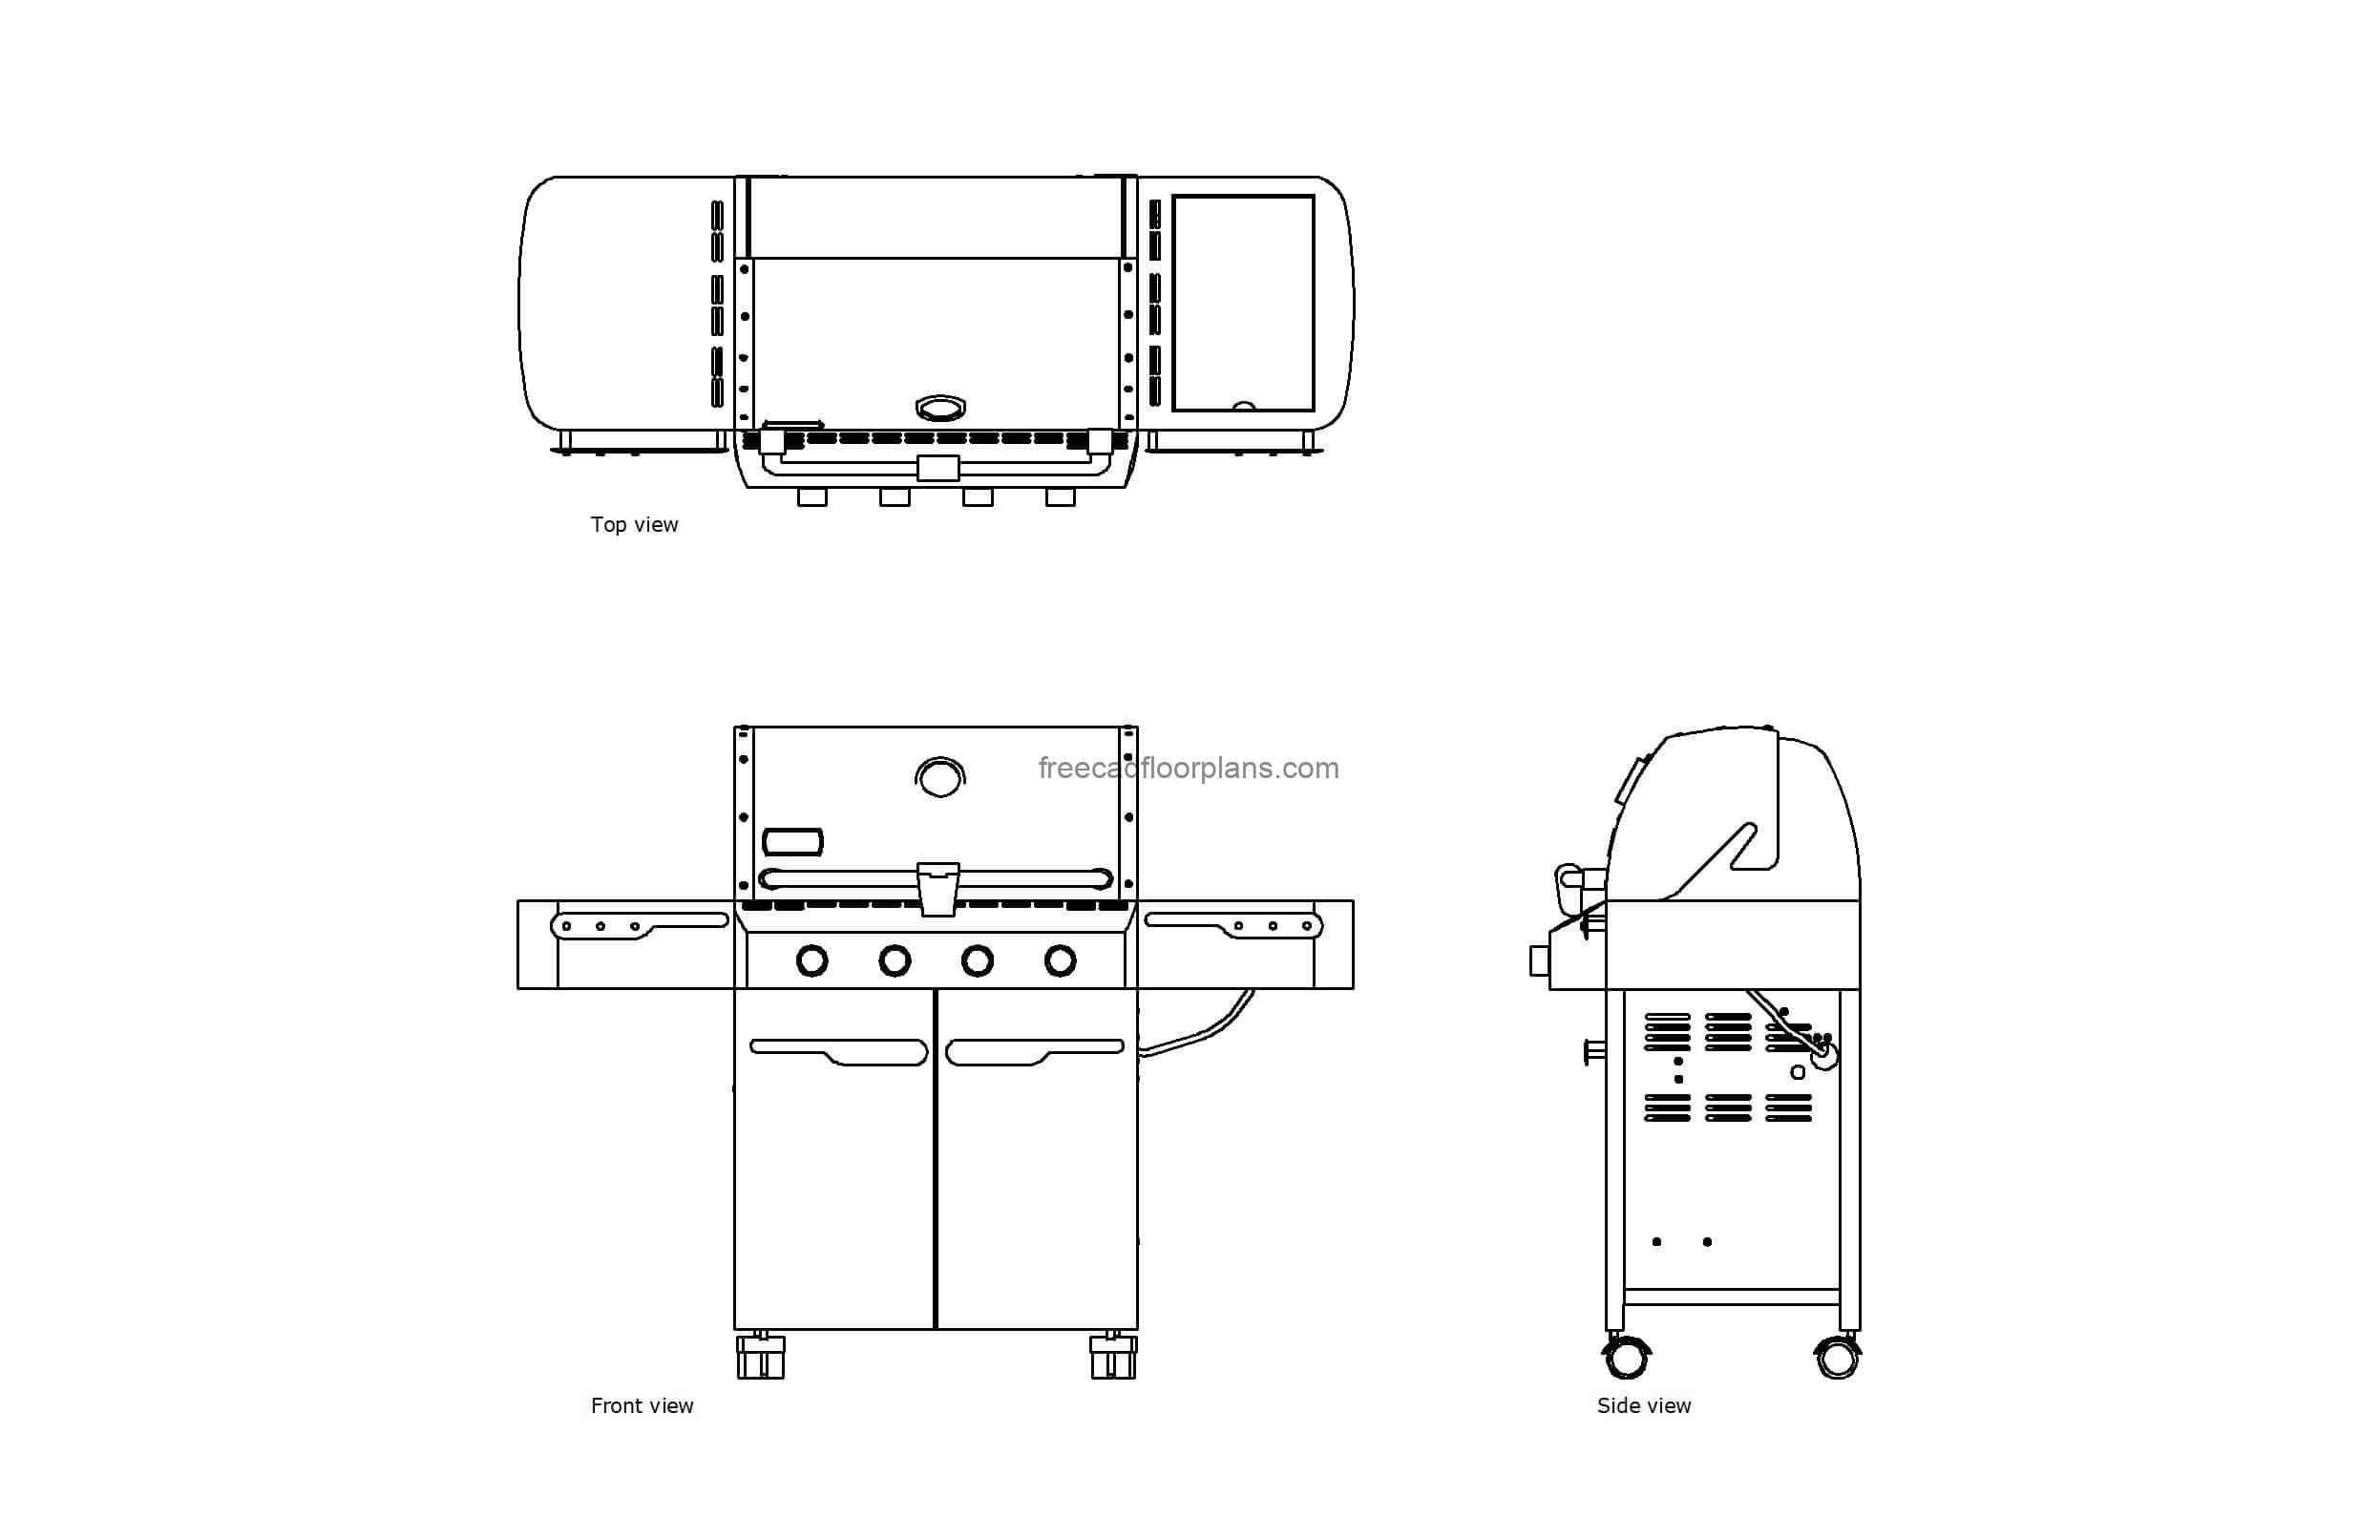 autocad drawing of a weber summit gas grill, plan and elevatoin 2d views, dwg file free for download